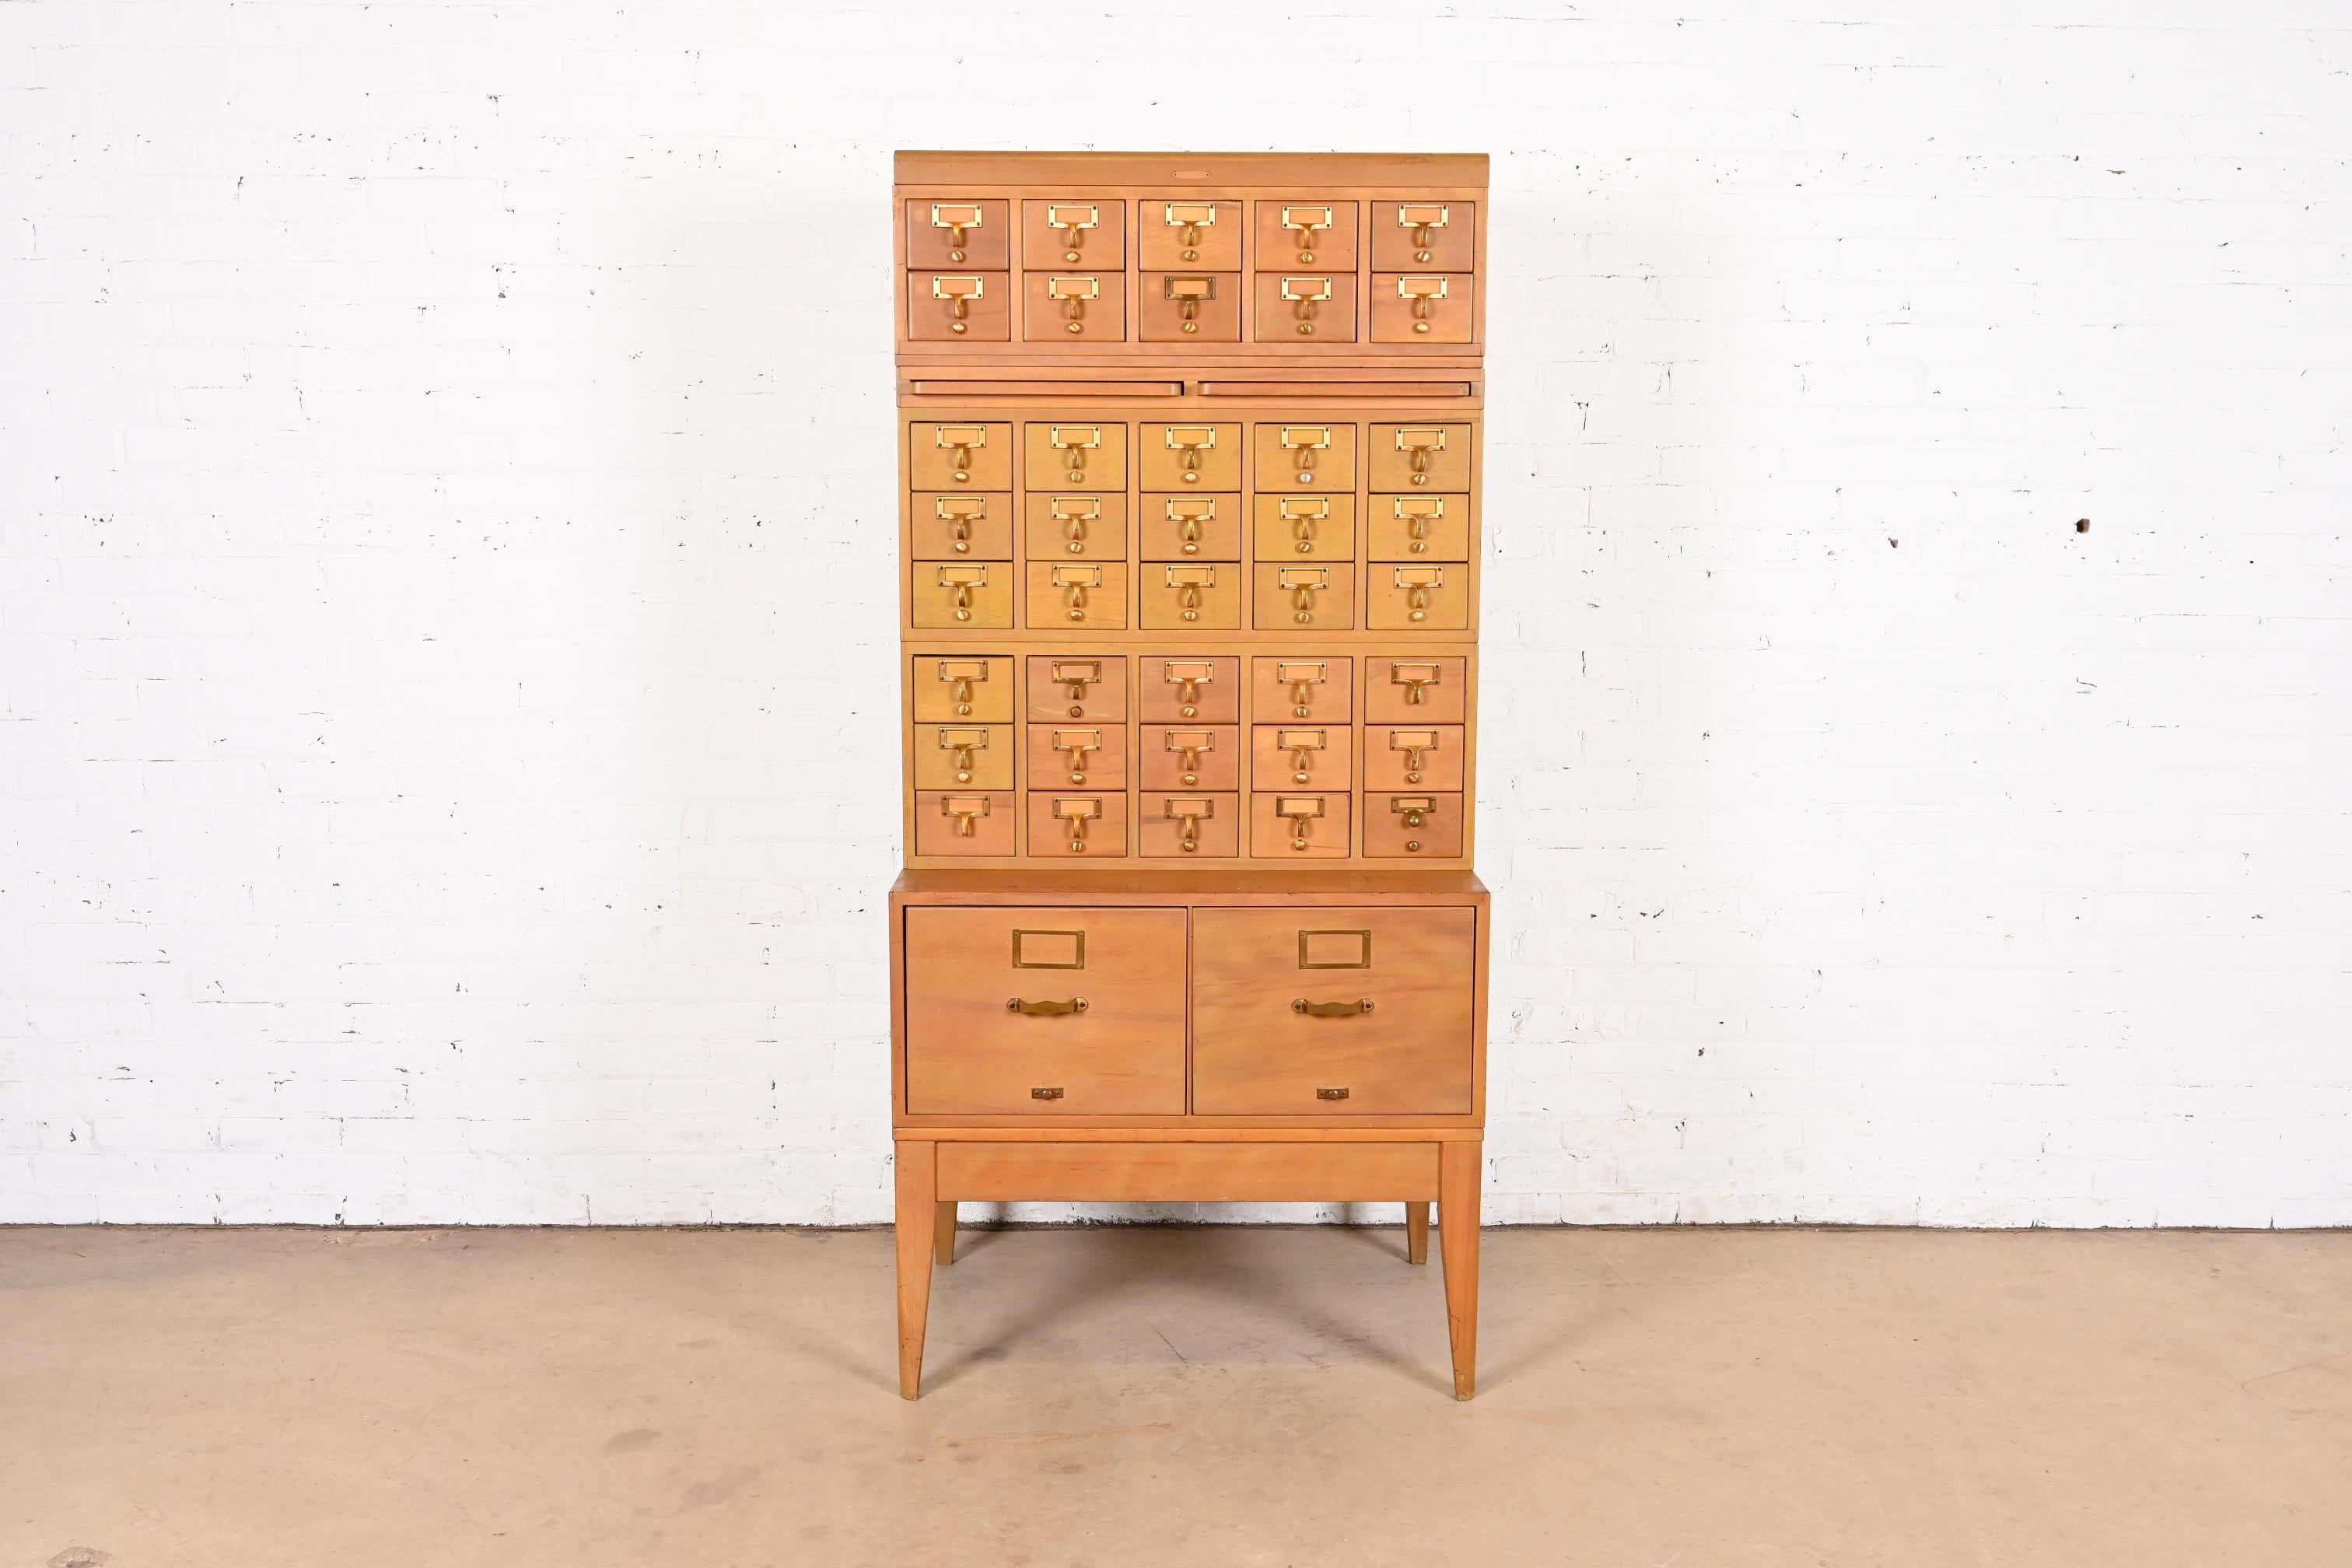 A beautiful Mid-Century Modern 42-drawer library card catalog or file cabinet with two pull-out writing tablets

By Remington Rand

USA, Circa 1950s

Maple, with brass hardware.

Measures: 33